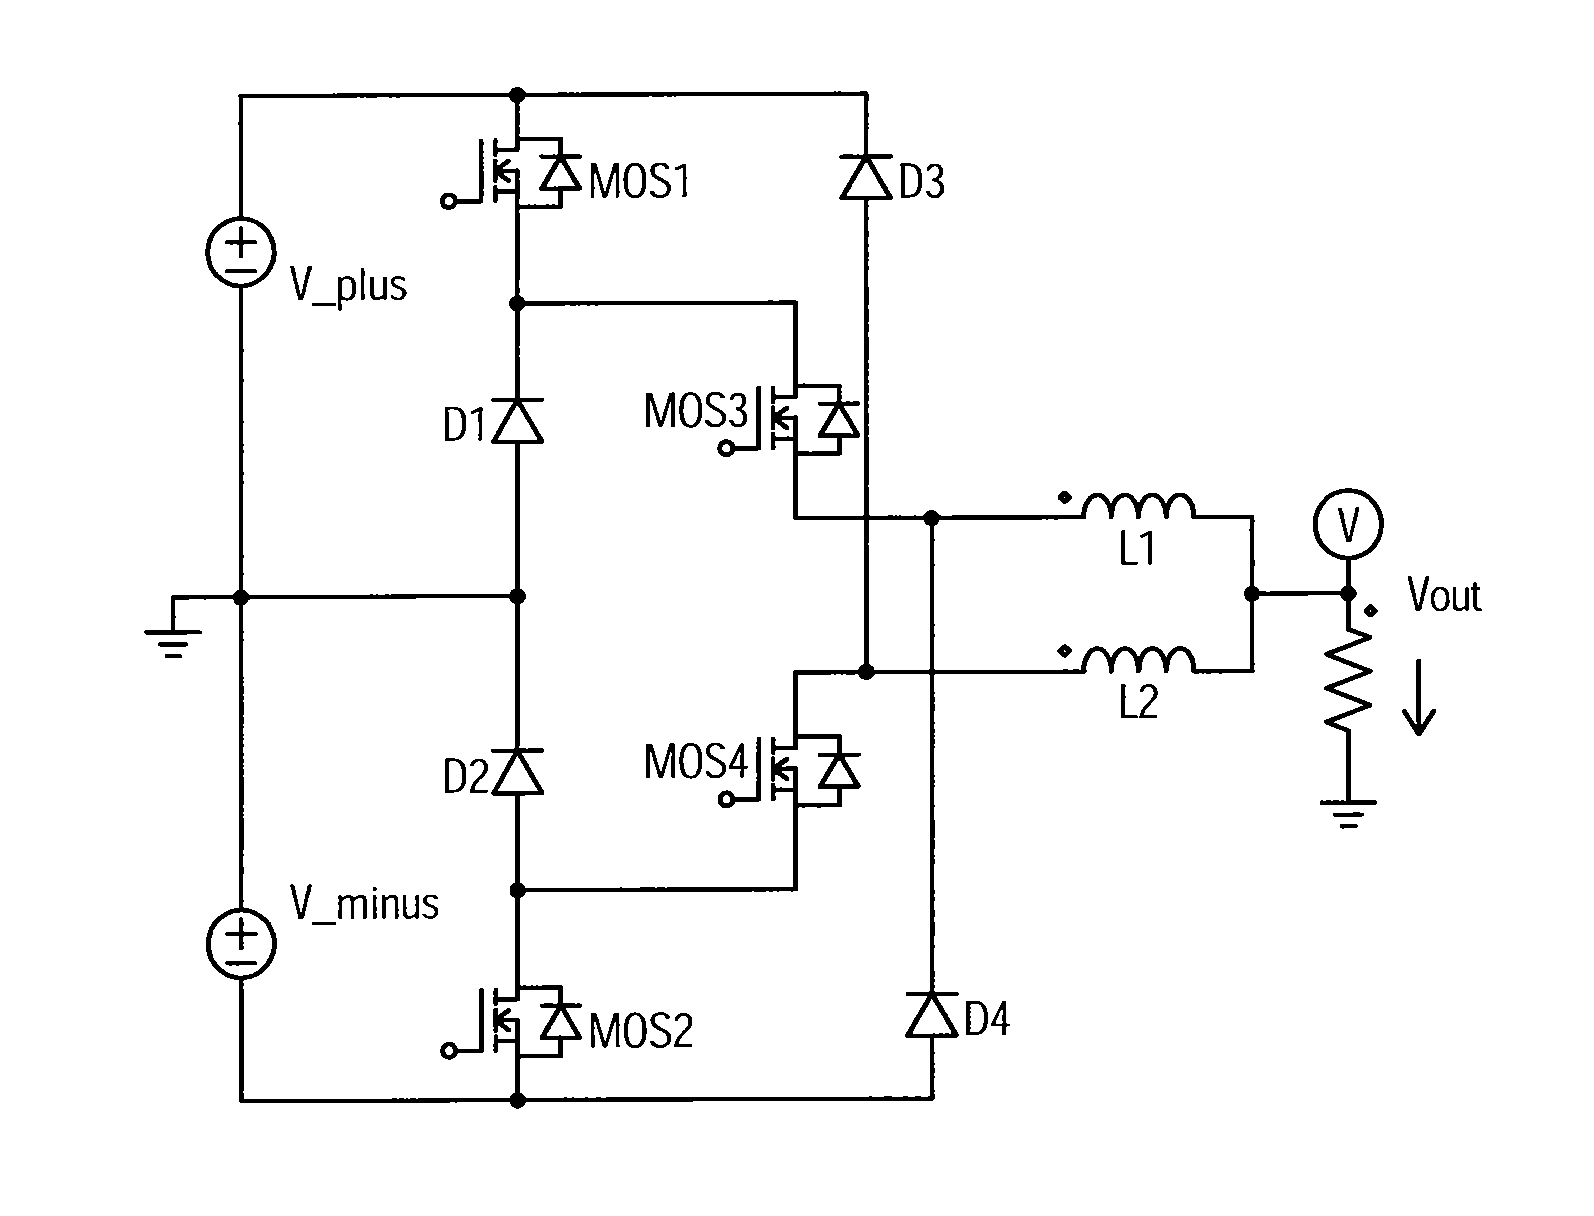 Inverter topologies usable with reactive power